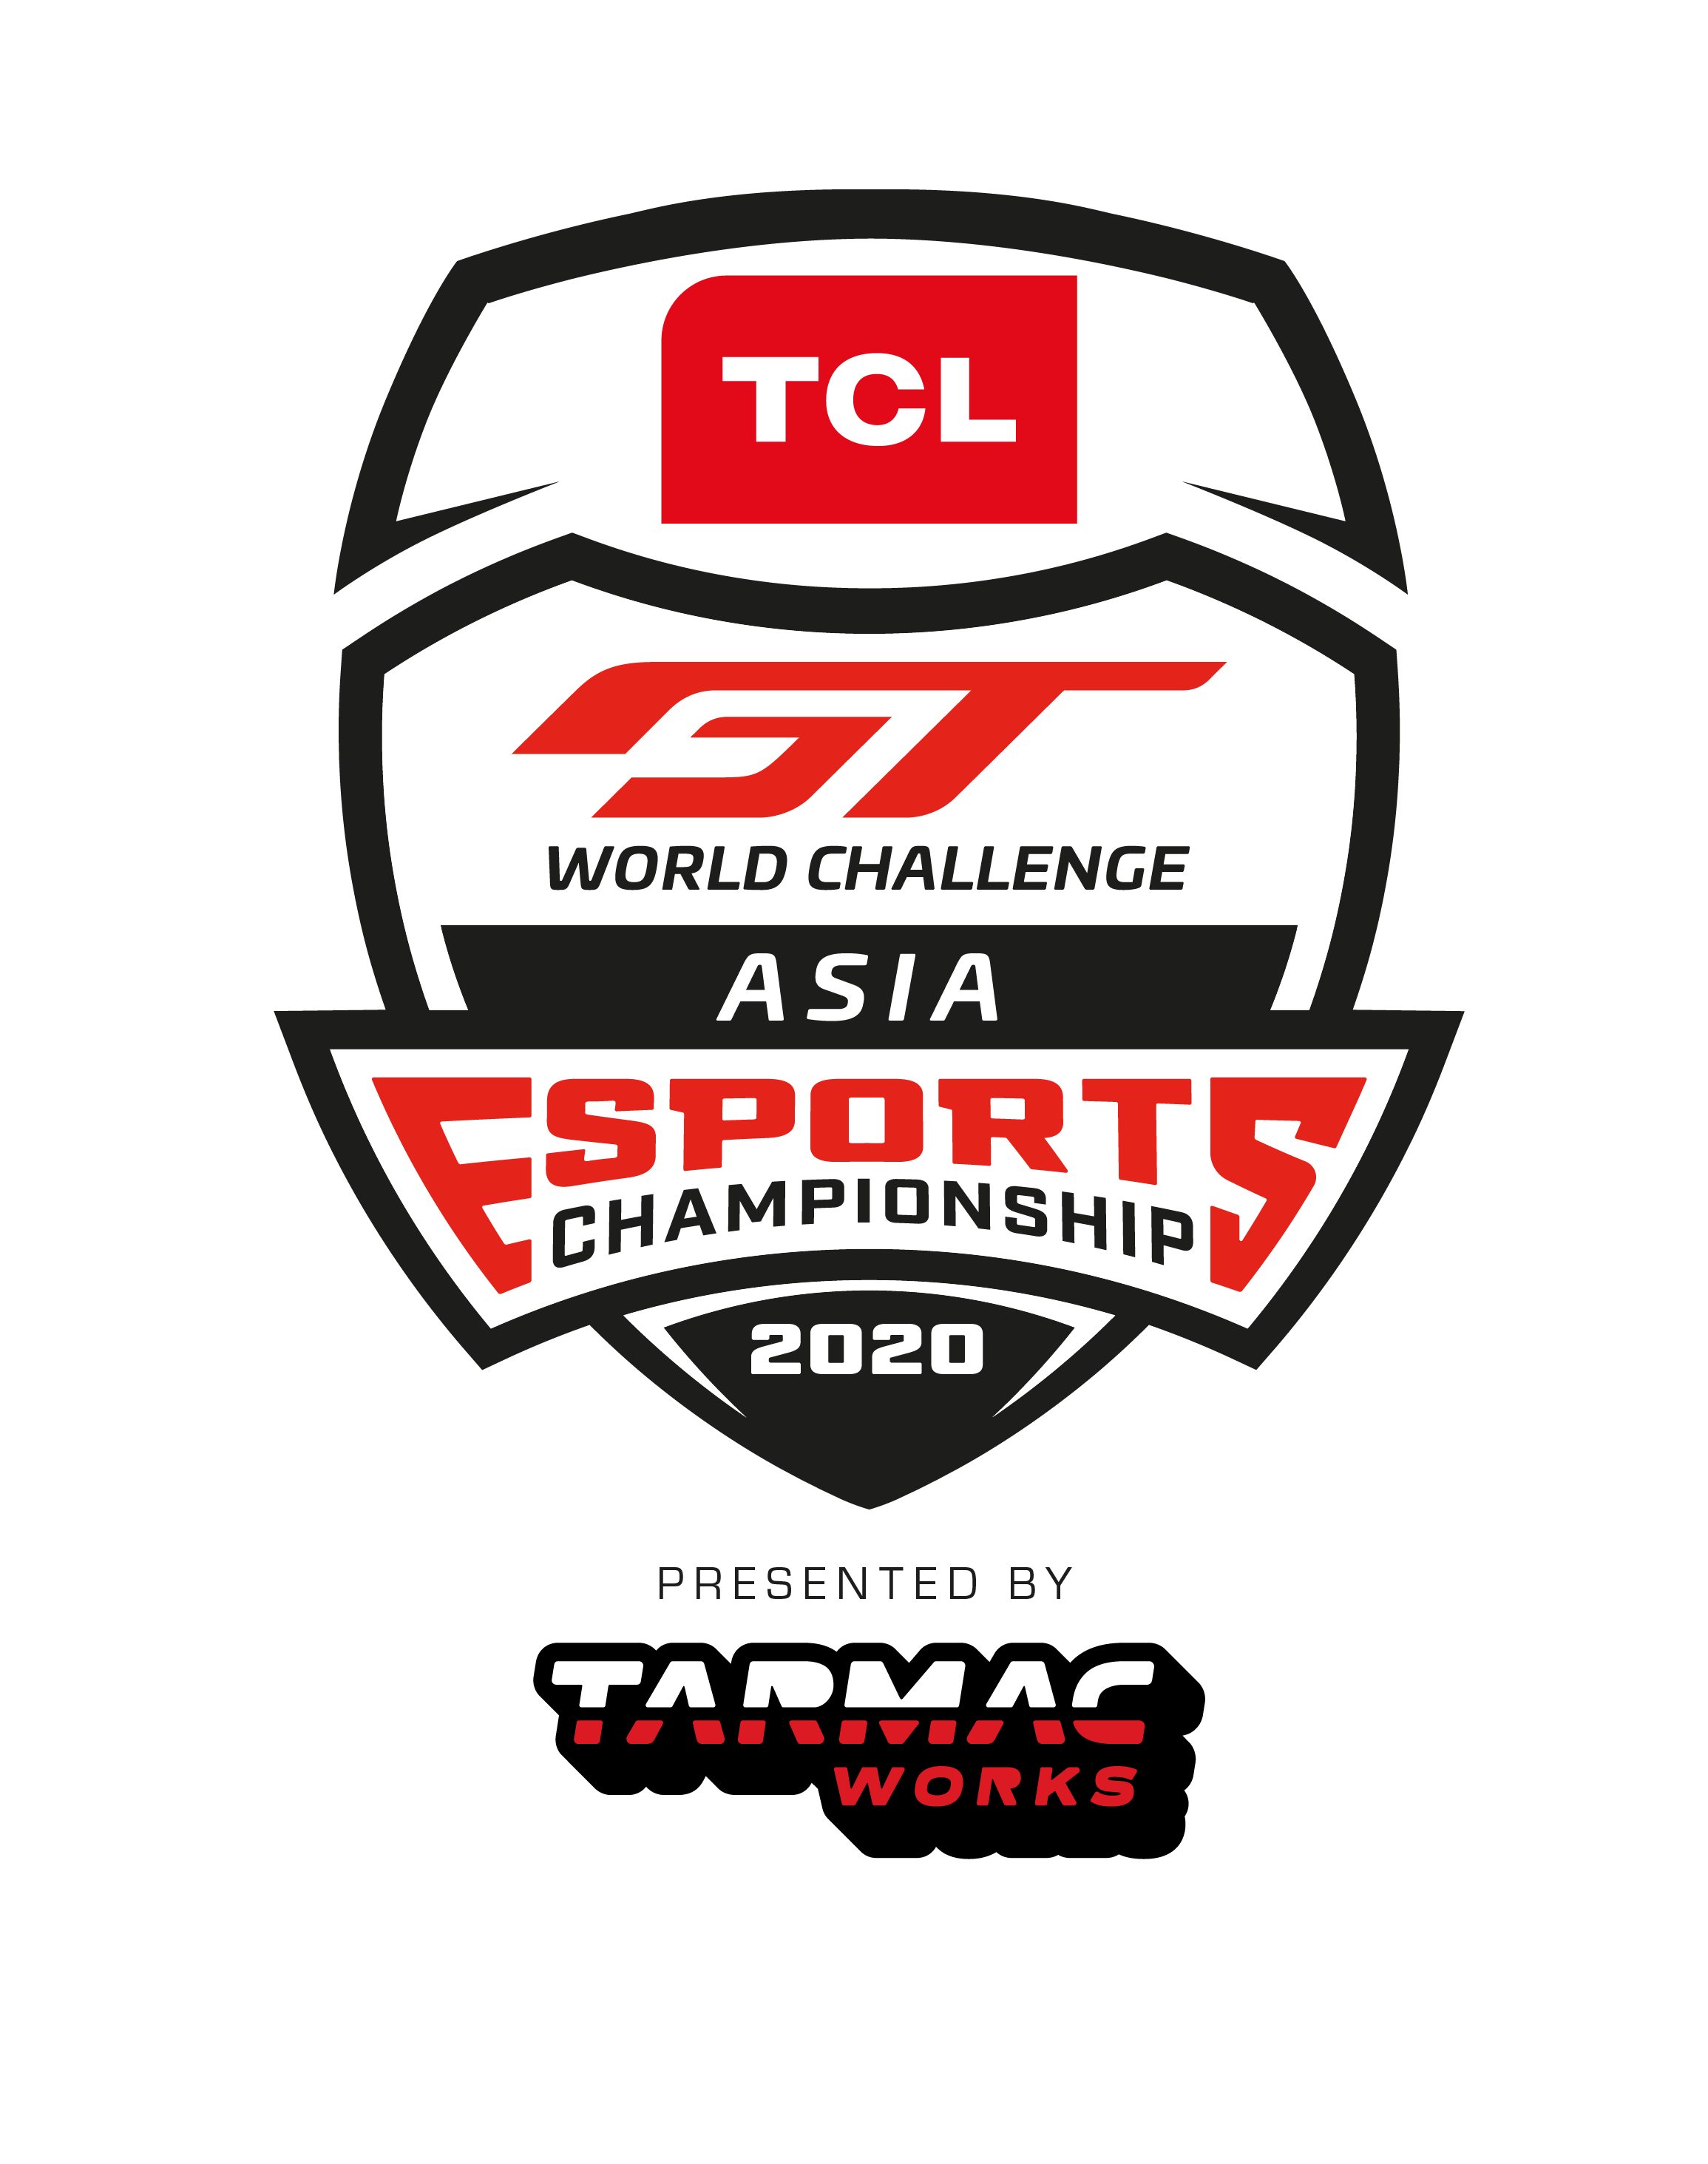 TCL Becomes Title Sponsor of GT World Challenge Asia Esports Presented by Tarmac Works